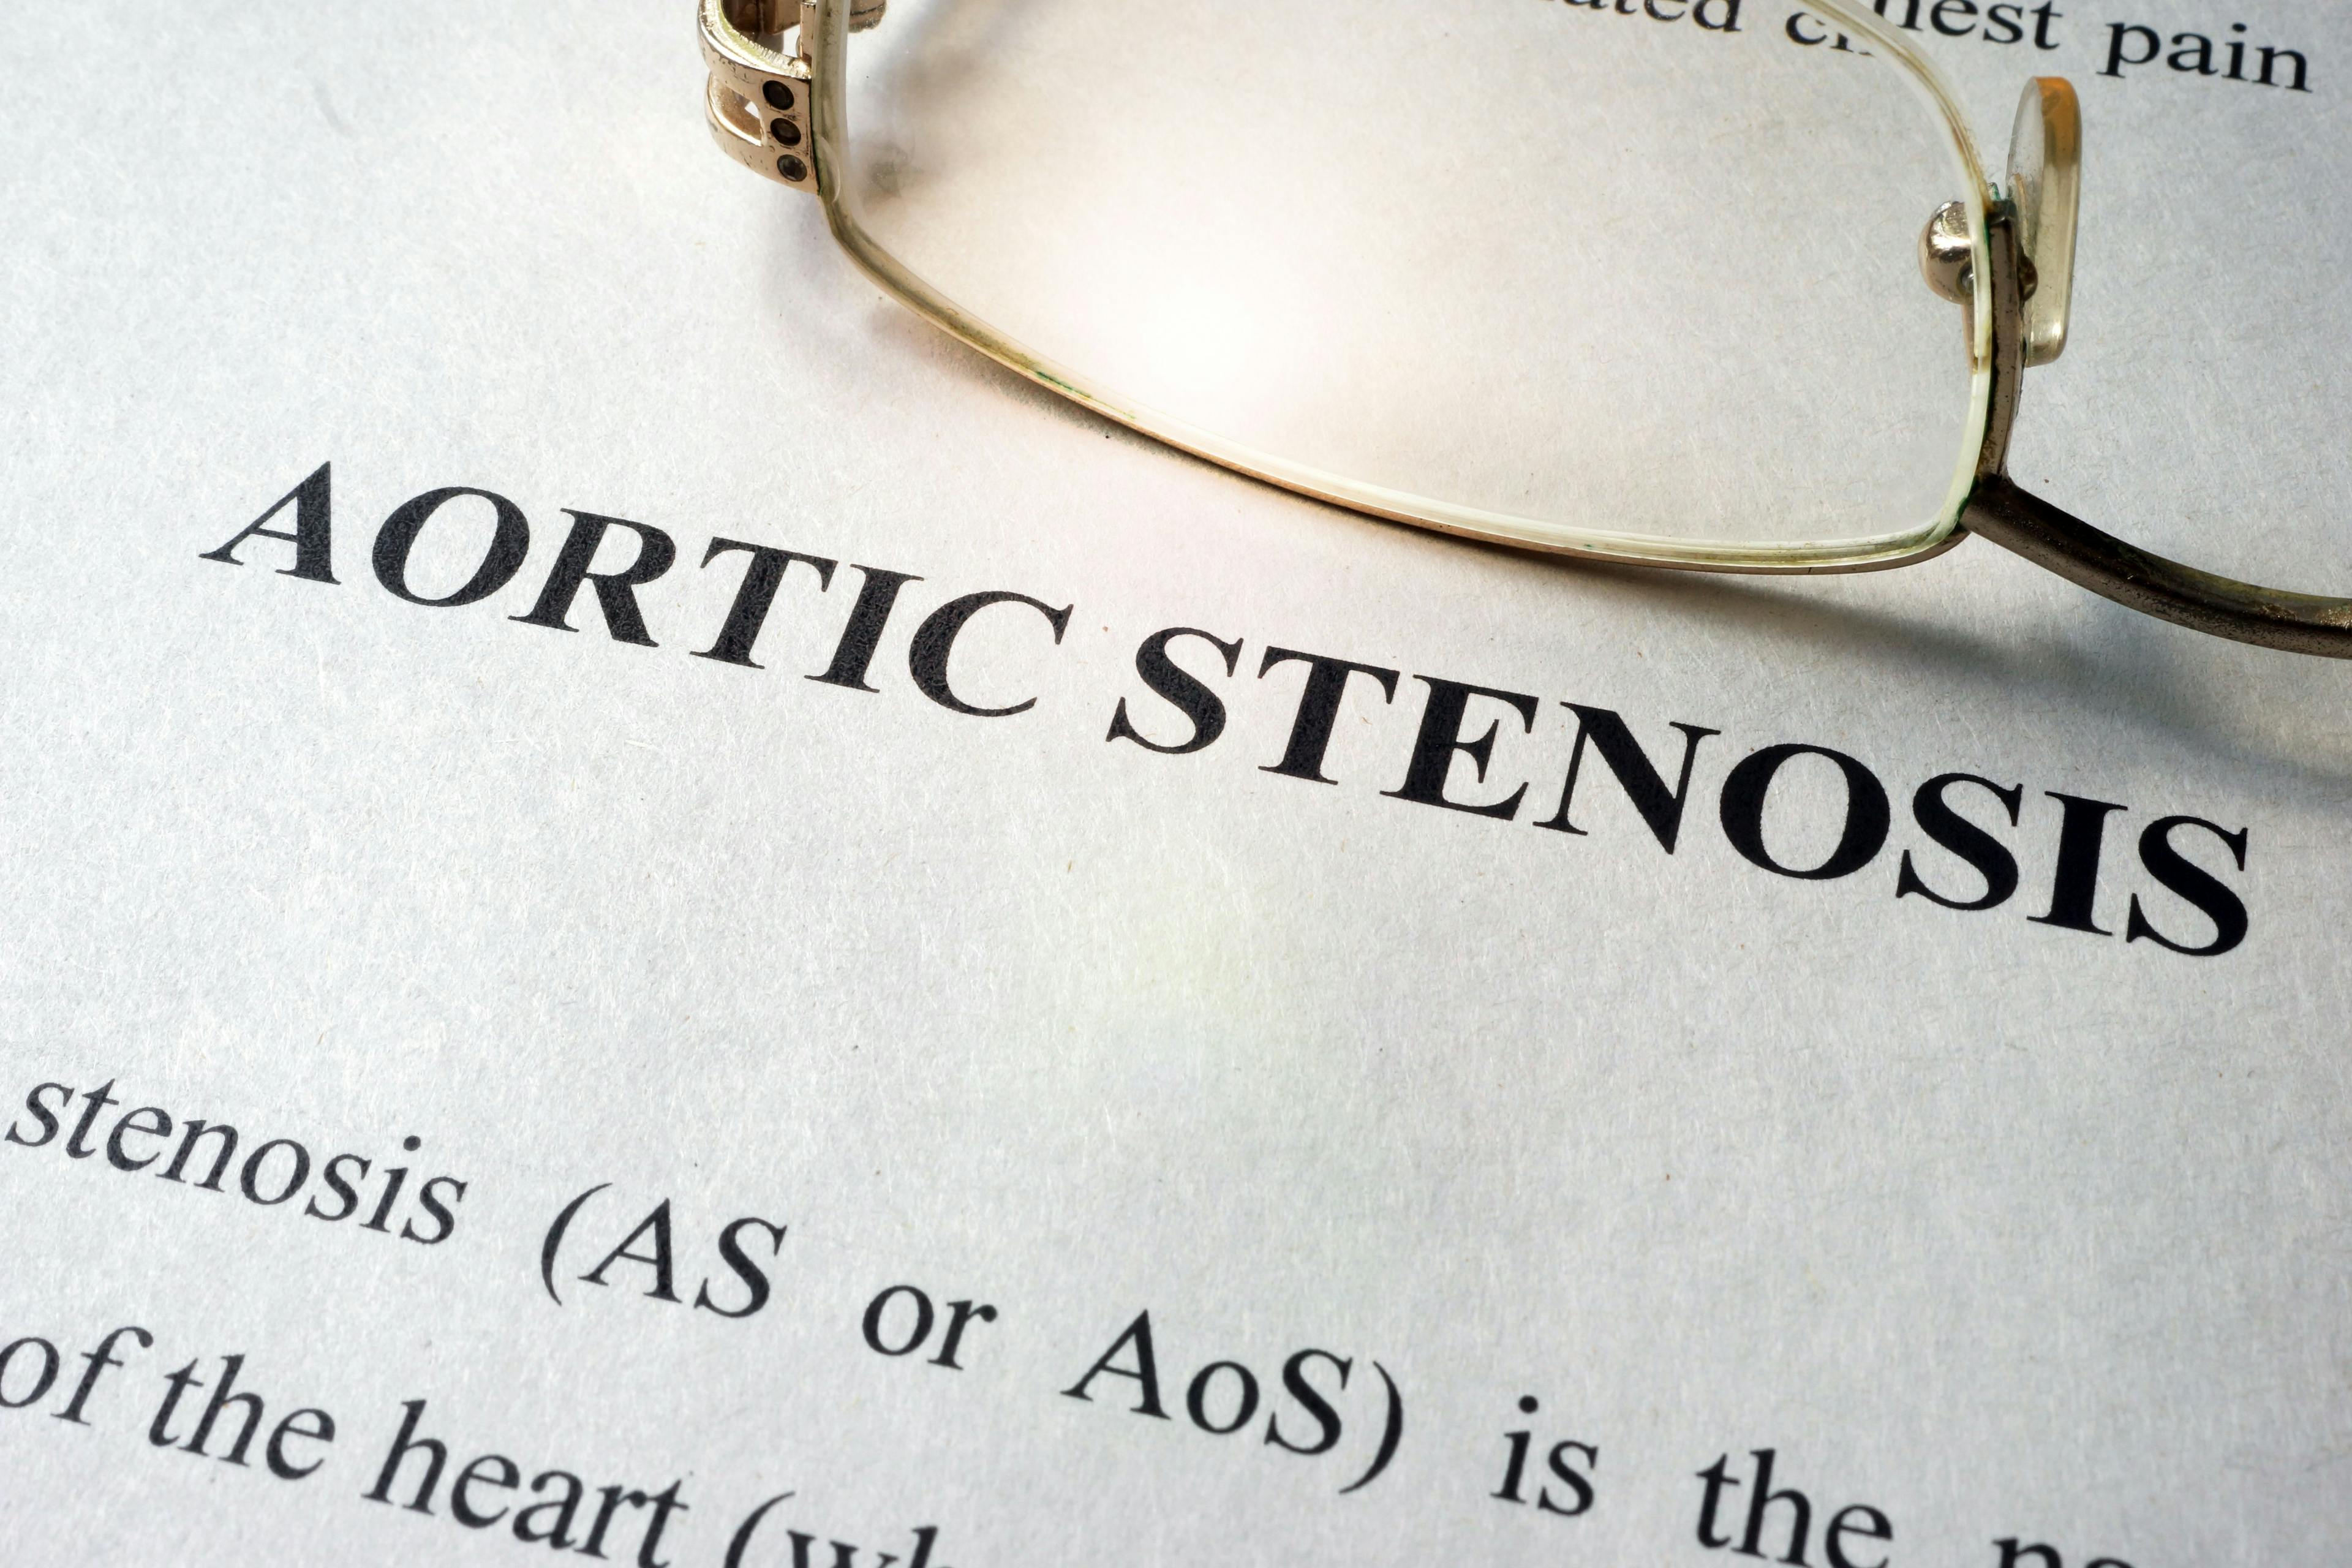 Page with title aortic stenosis and glasses | Image Credit: Vitalii Vodolazskyi